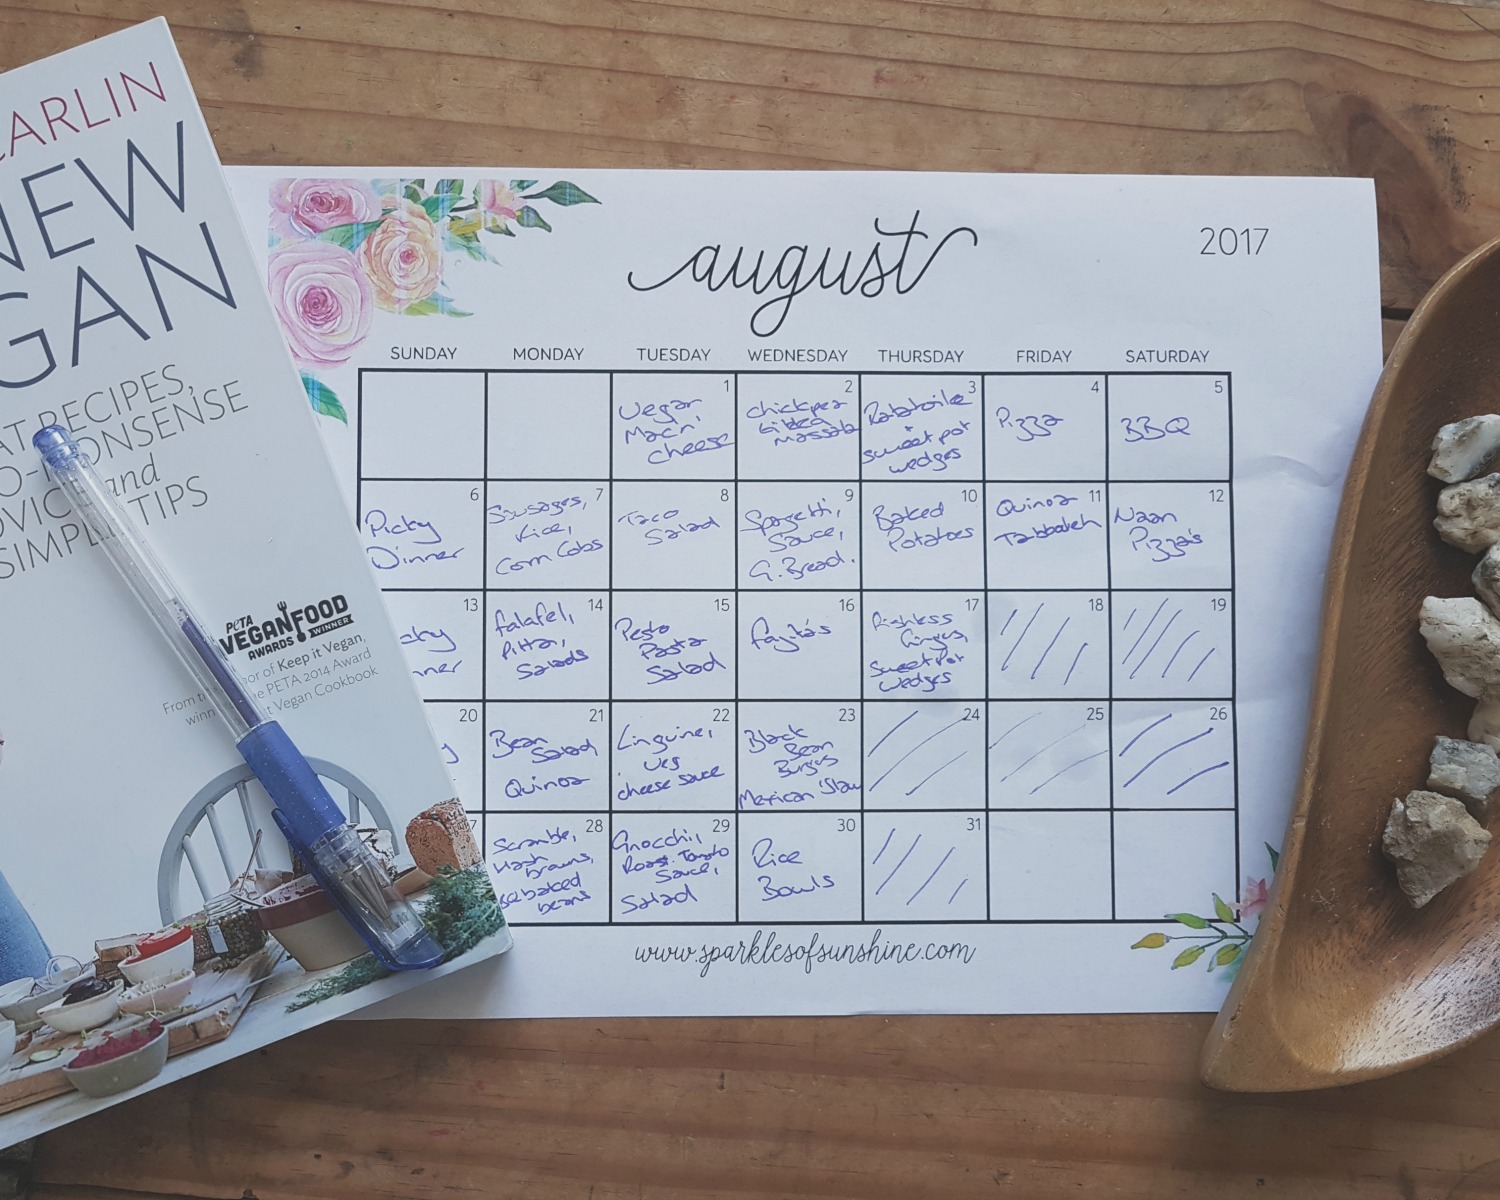 A family meal plan for August